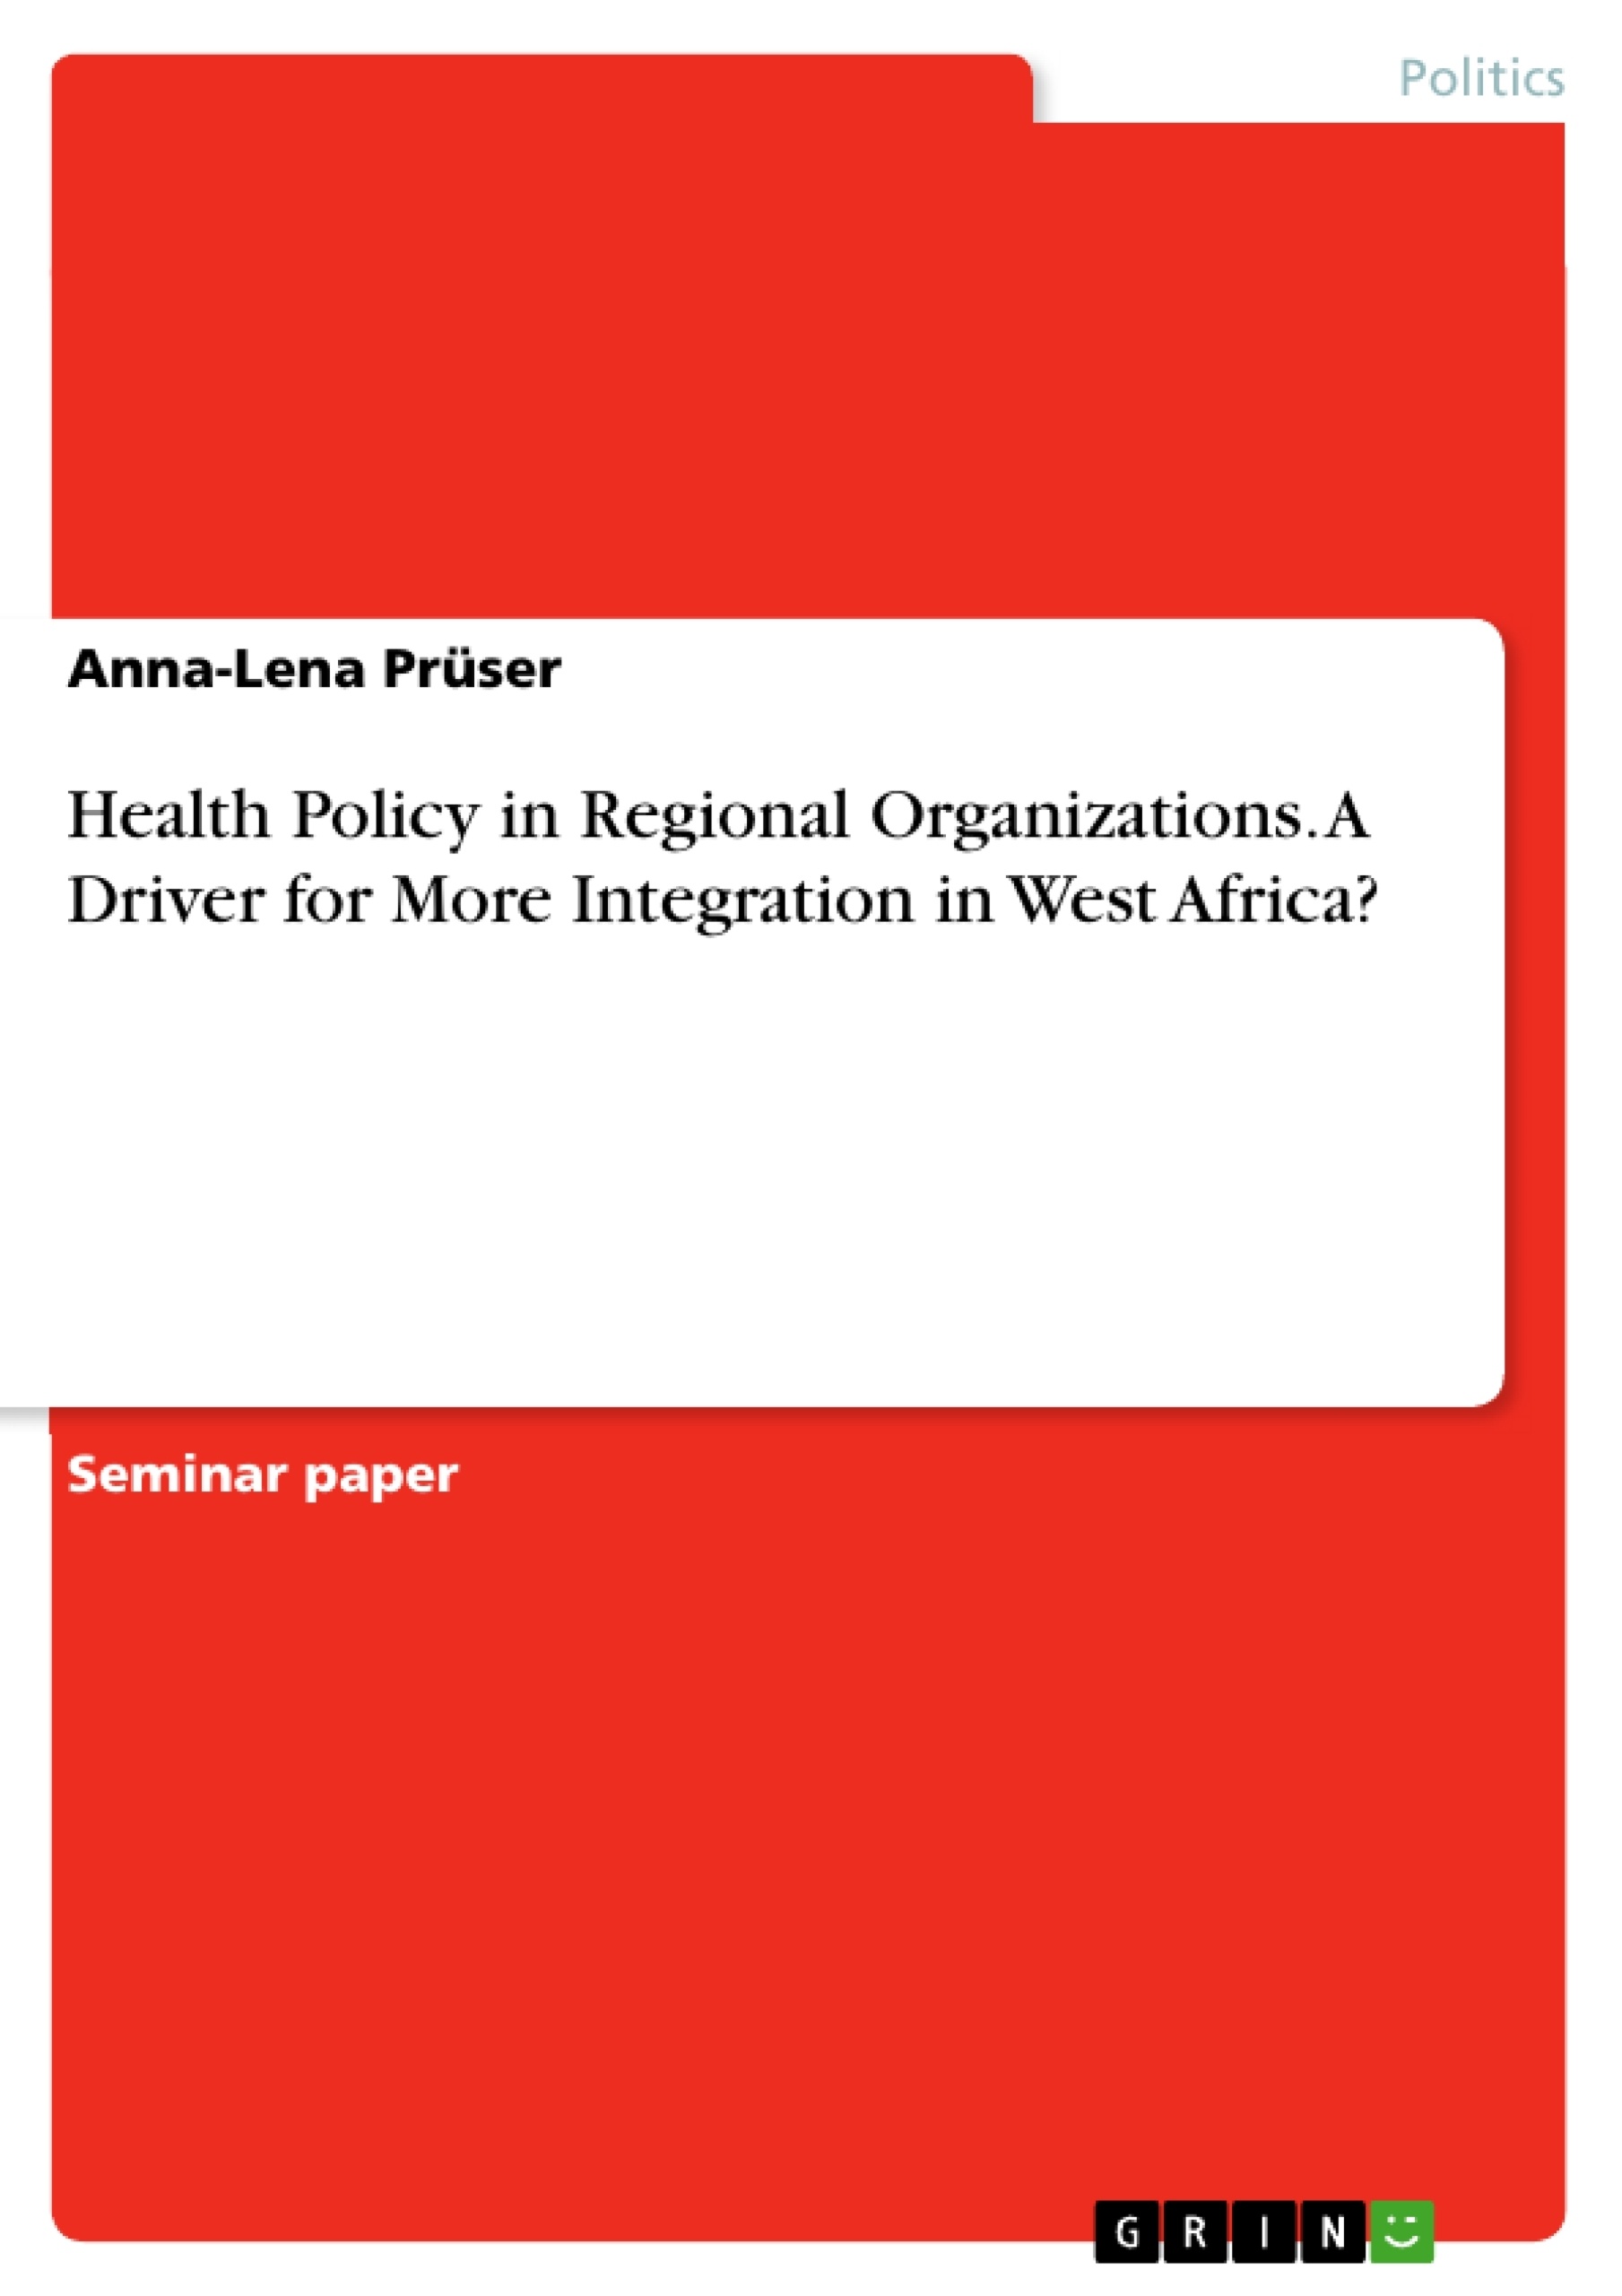 Title: Health Policy in Regional Organizations. A Driver for More Integration in West Africa?